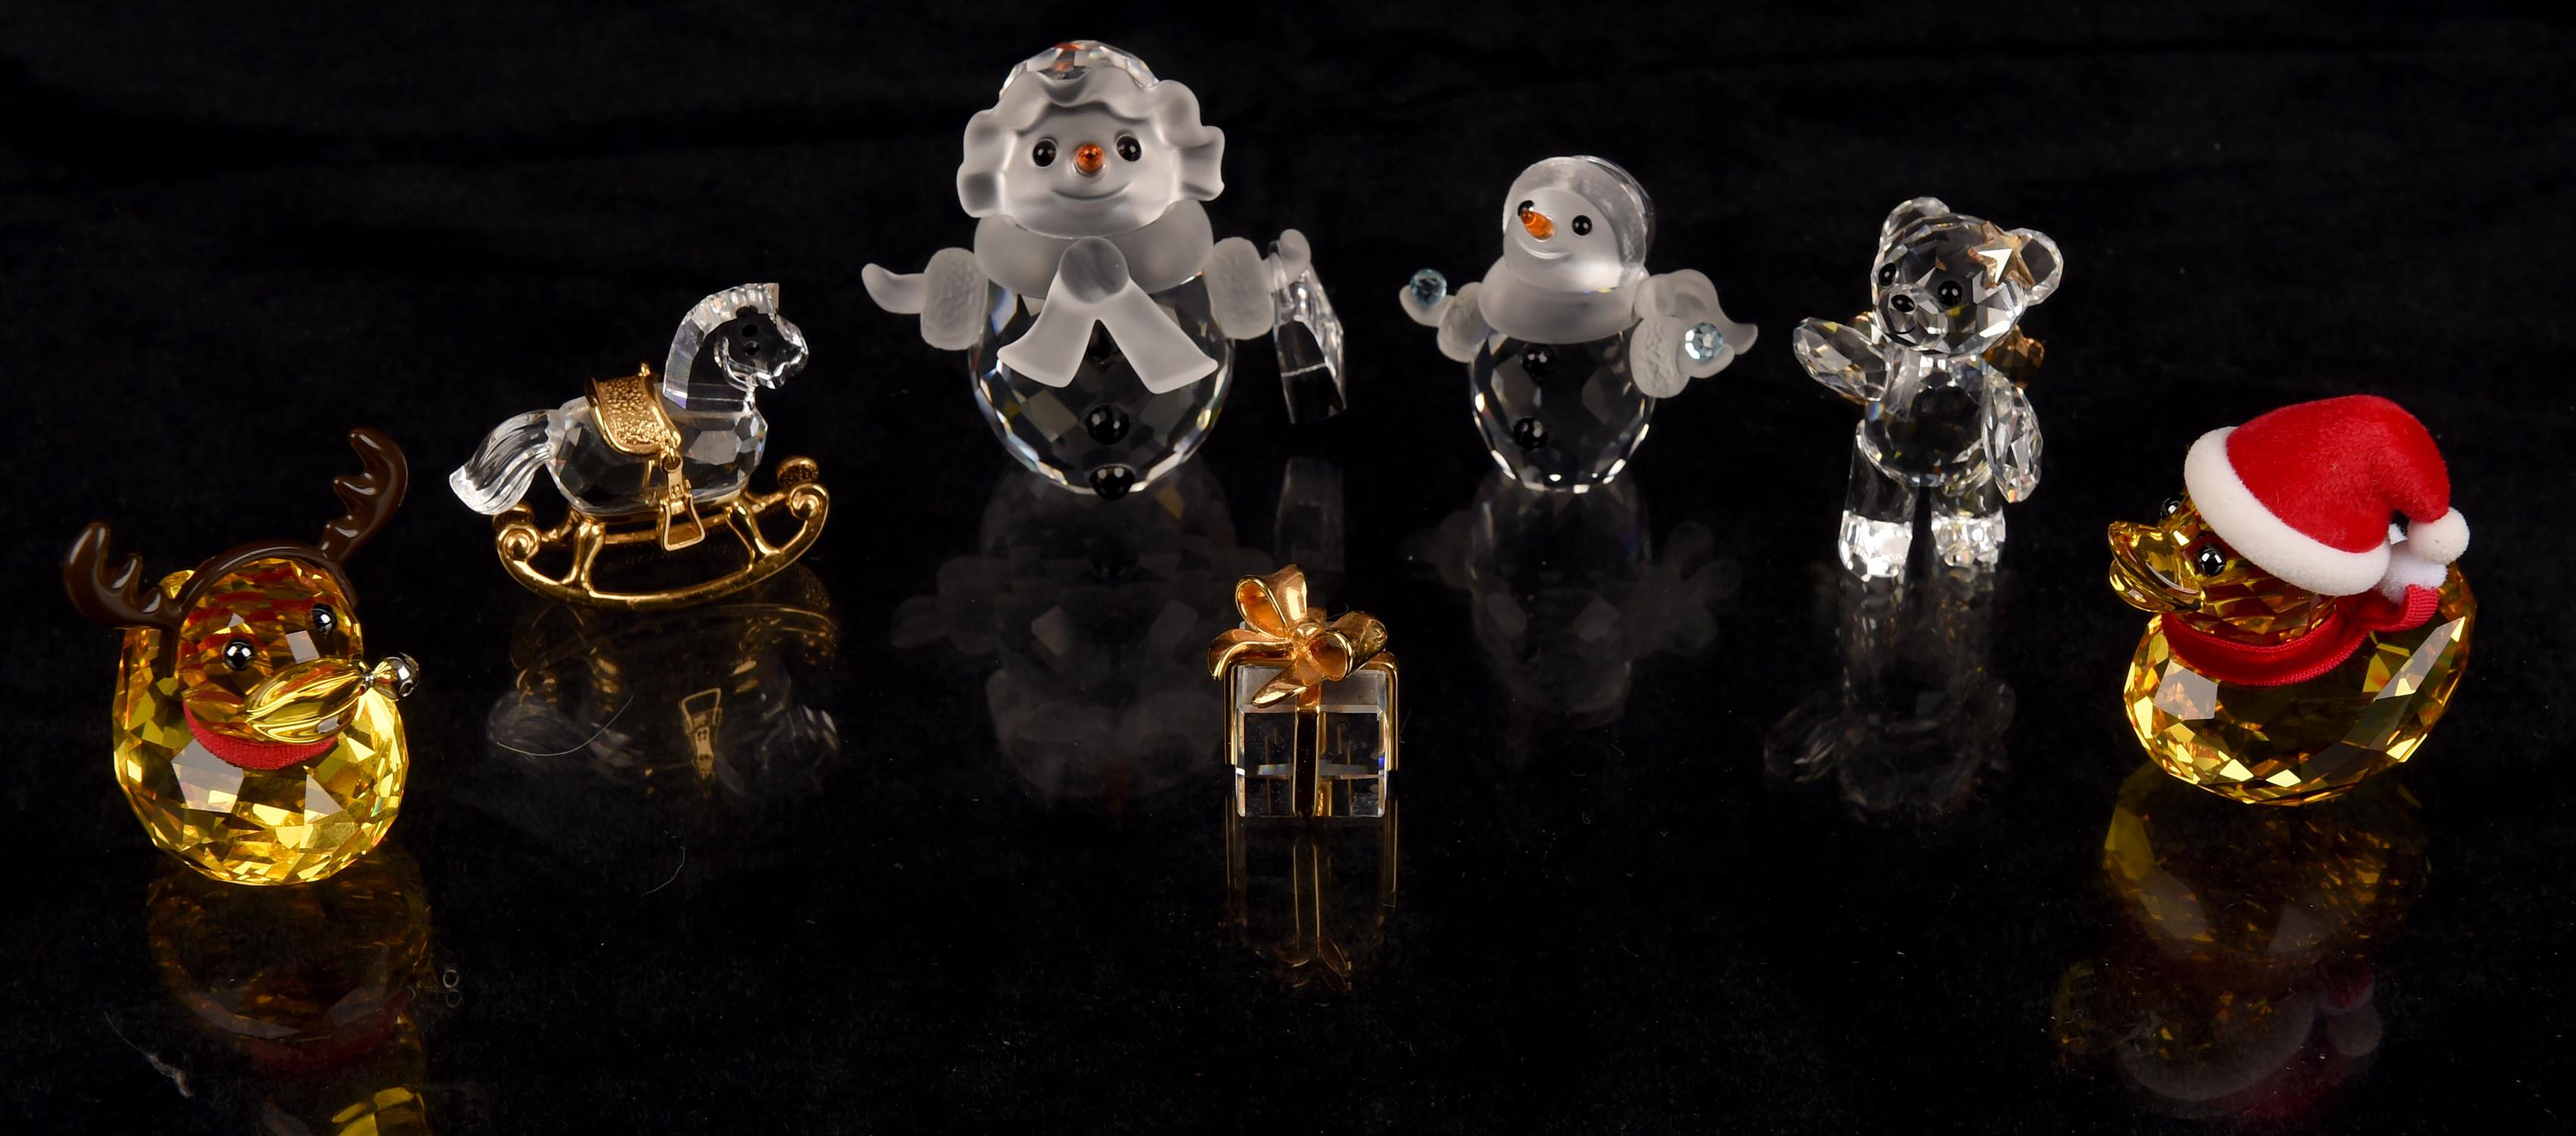 Swarovski crystal glass models including a little snowman (624572), snow woman holding a little - Image 3 of 3